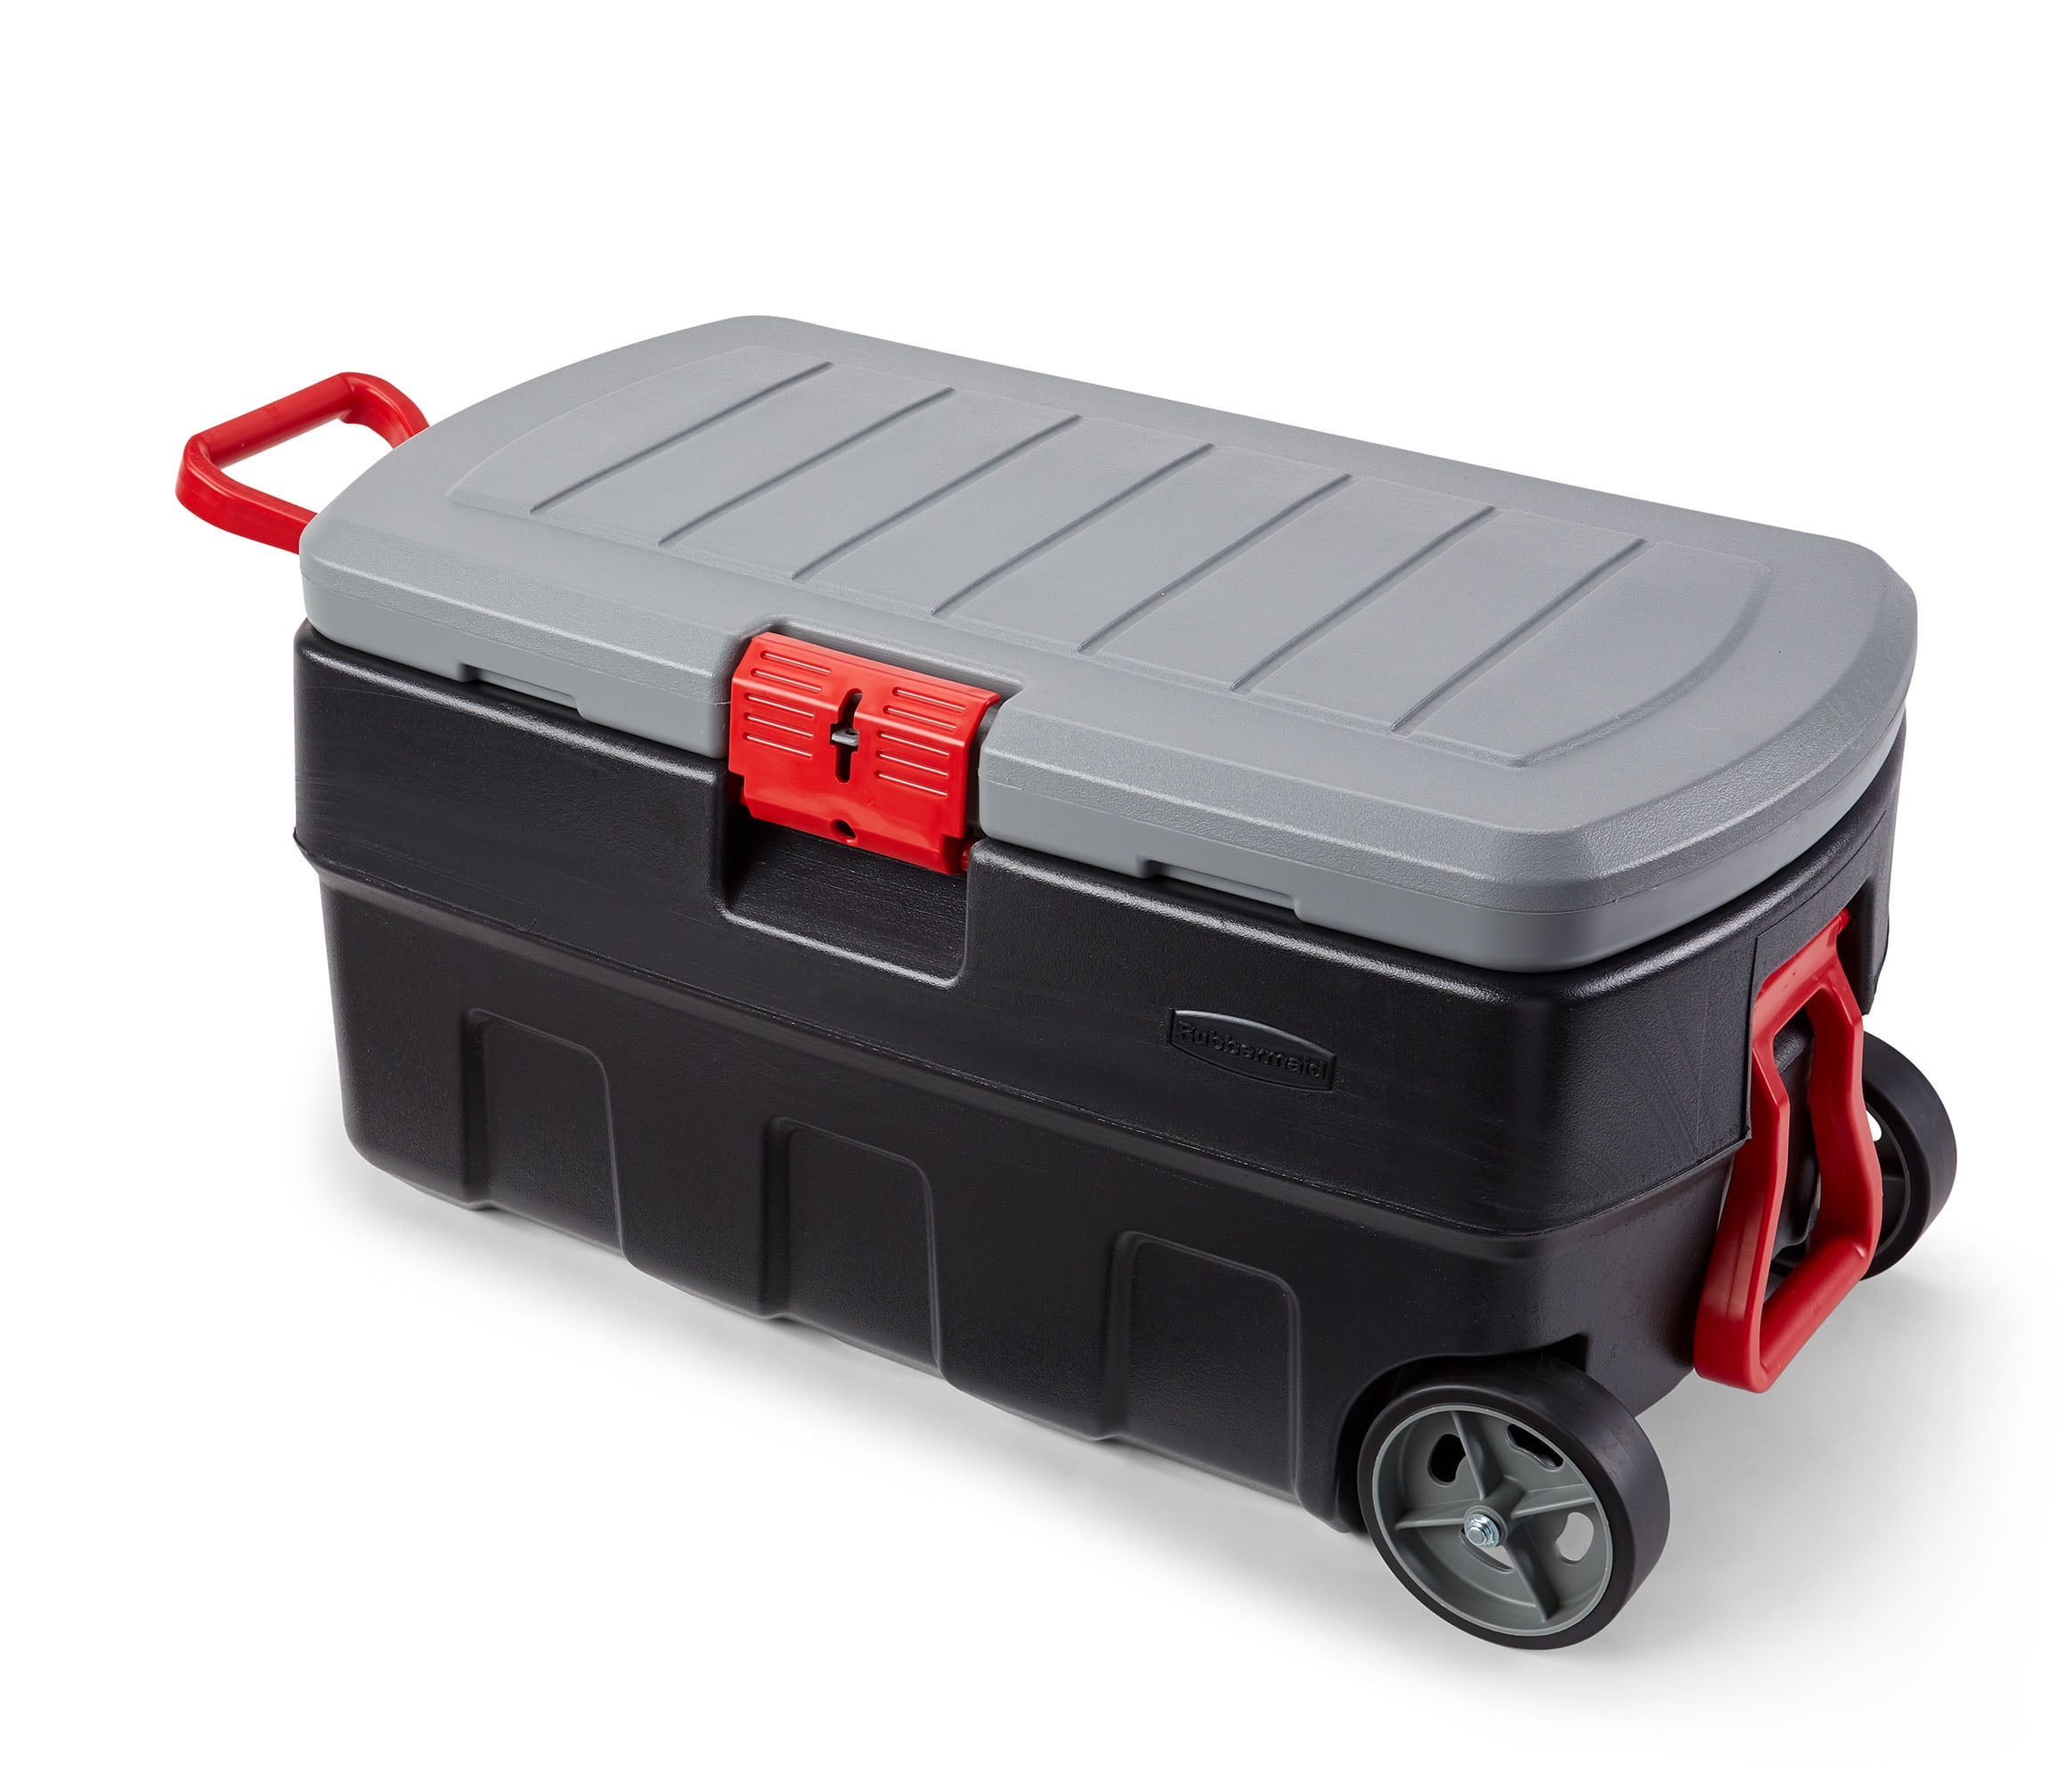  Rubbermaid ActionPacker️ 48 Gal Lockable Plastic Storage Bin,  Industrial, Rugged Large Container with Lid (Black,gray)